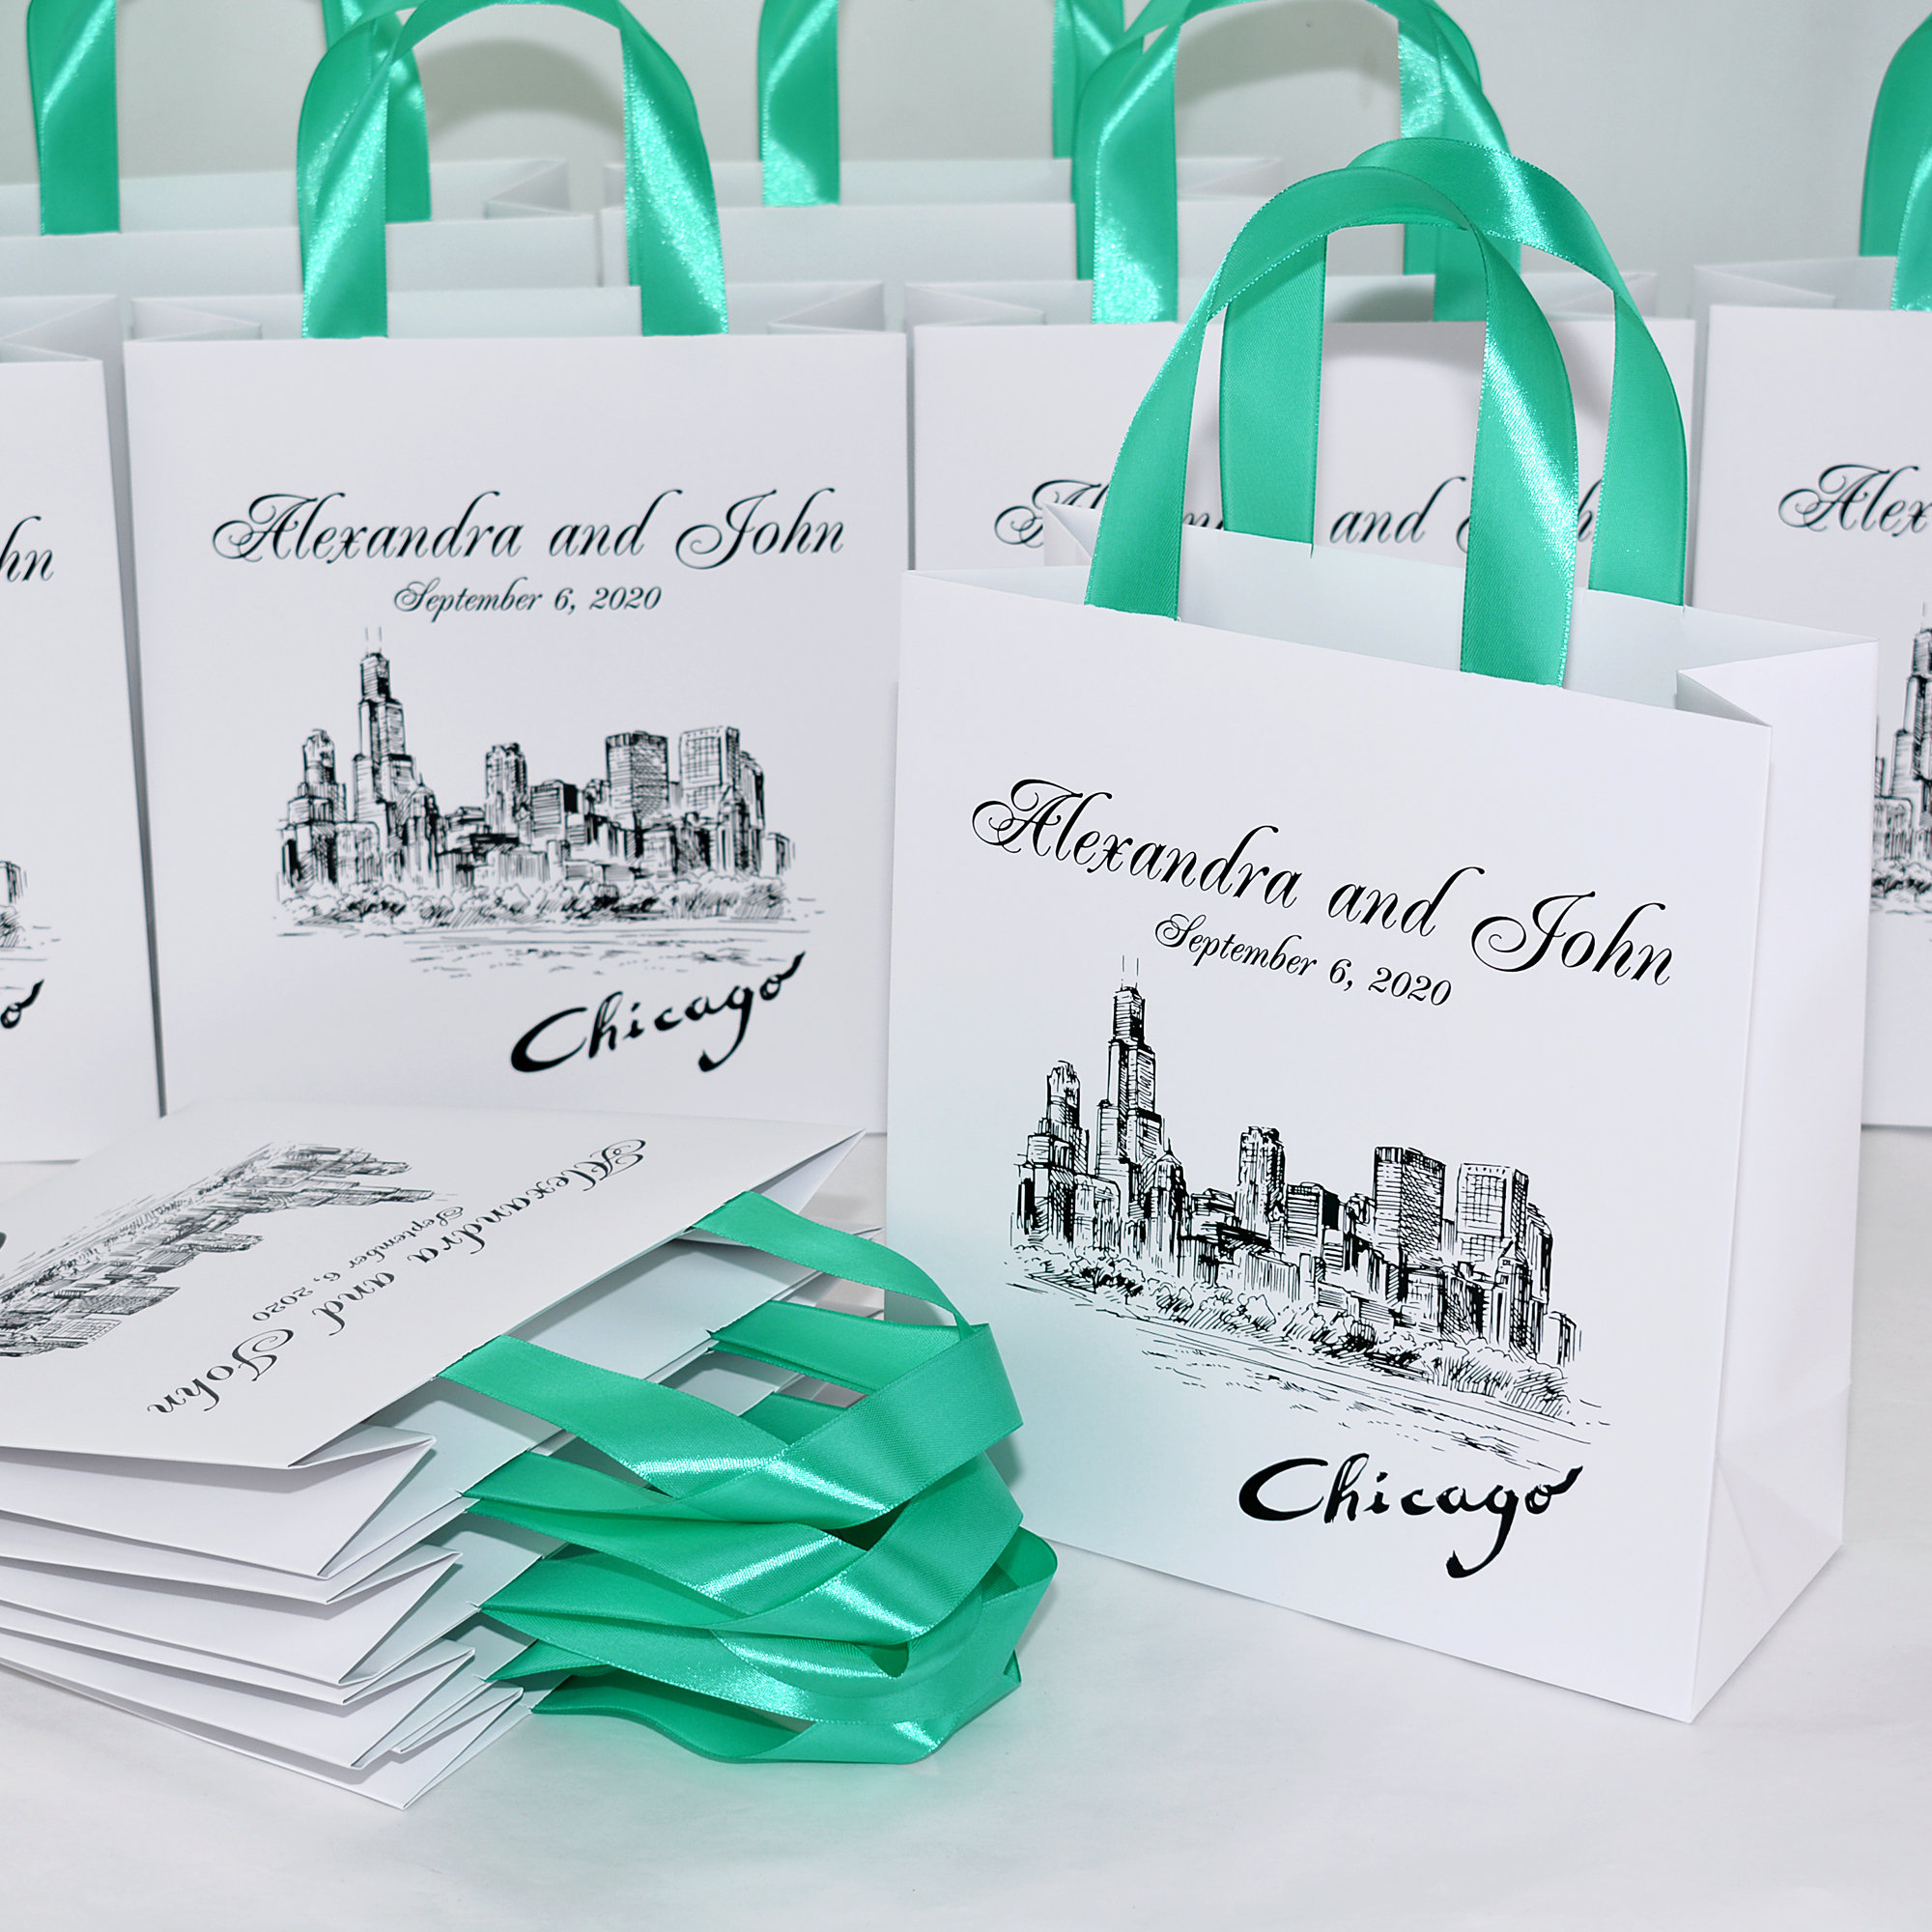 Wedding Welcome Bags with North Fork Potato Chips